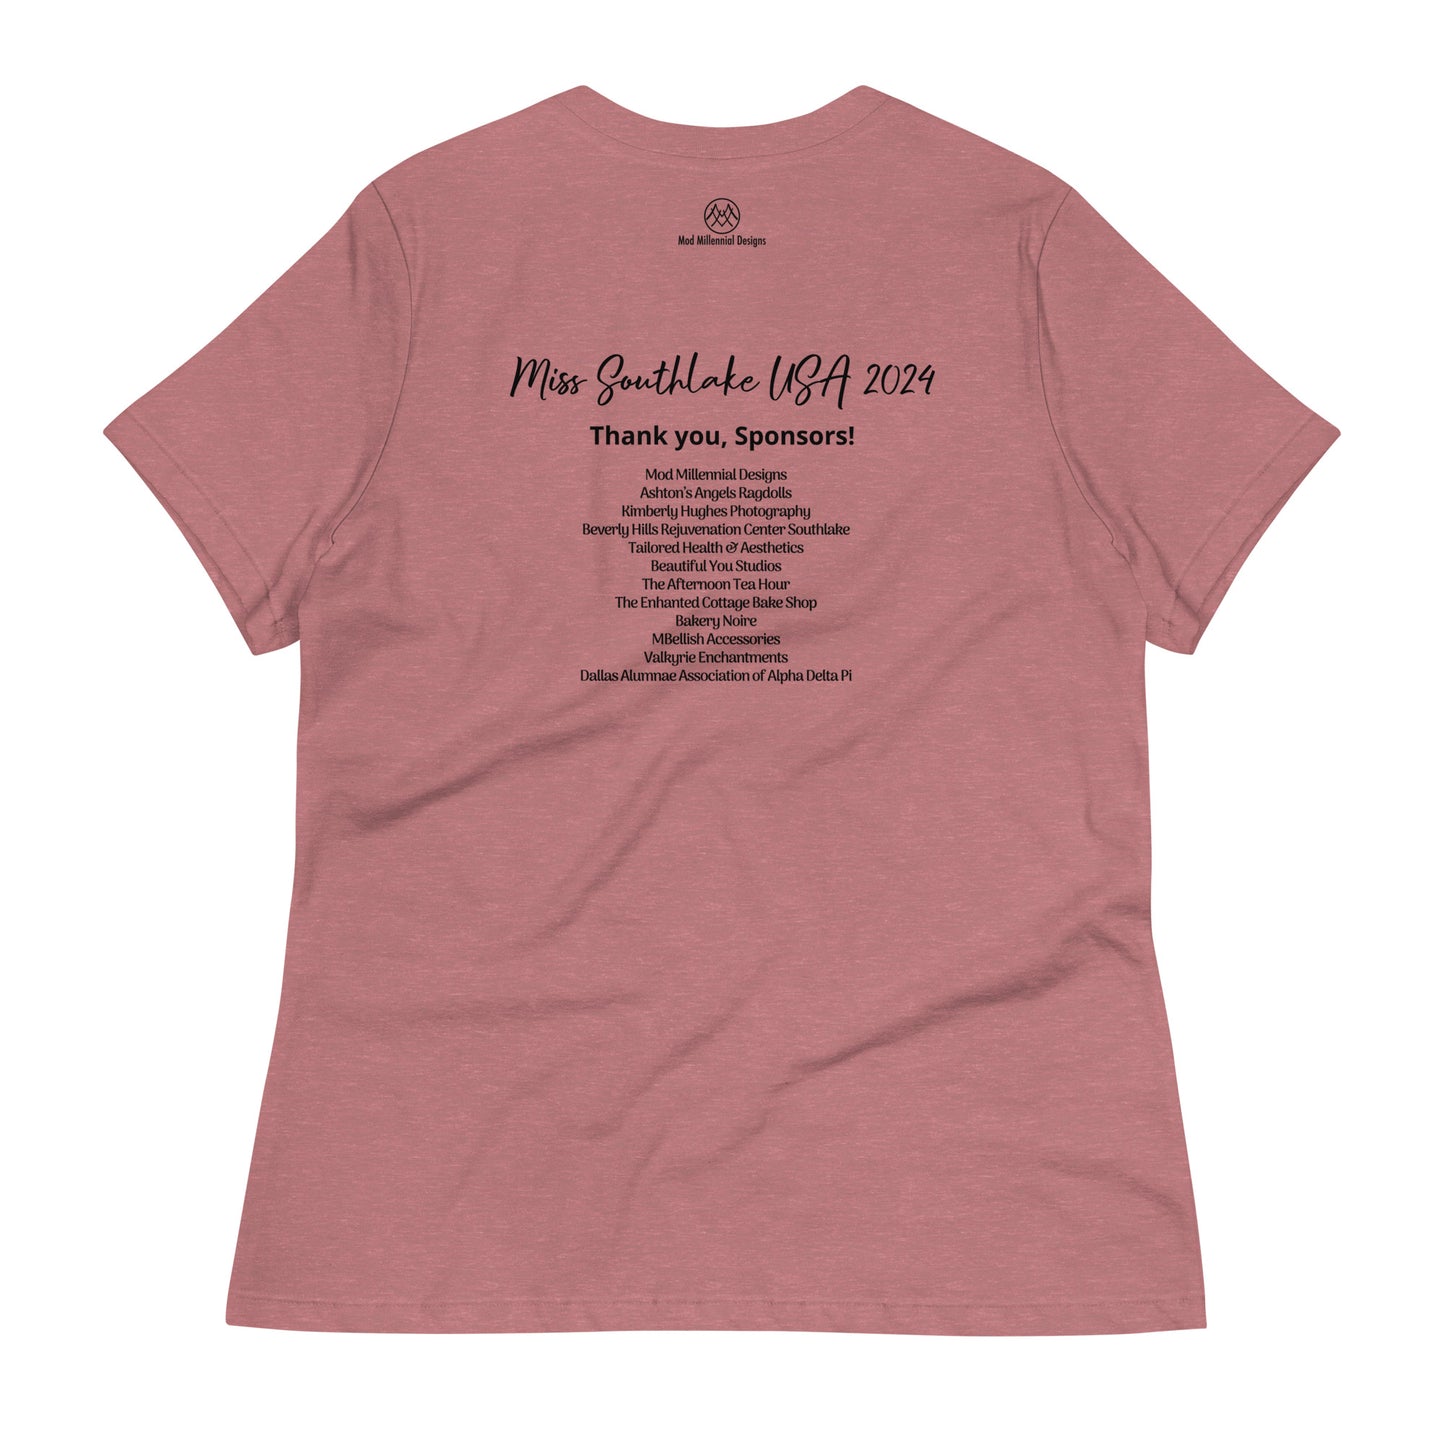 Women's Relaxed T-Shirt: Basics Collection - Miss Southlake USA 2024